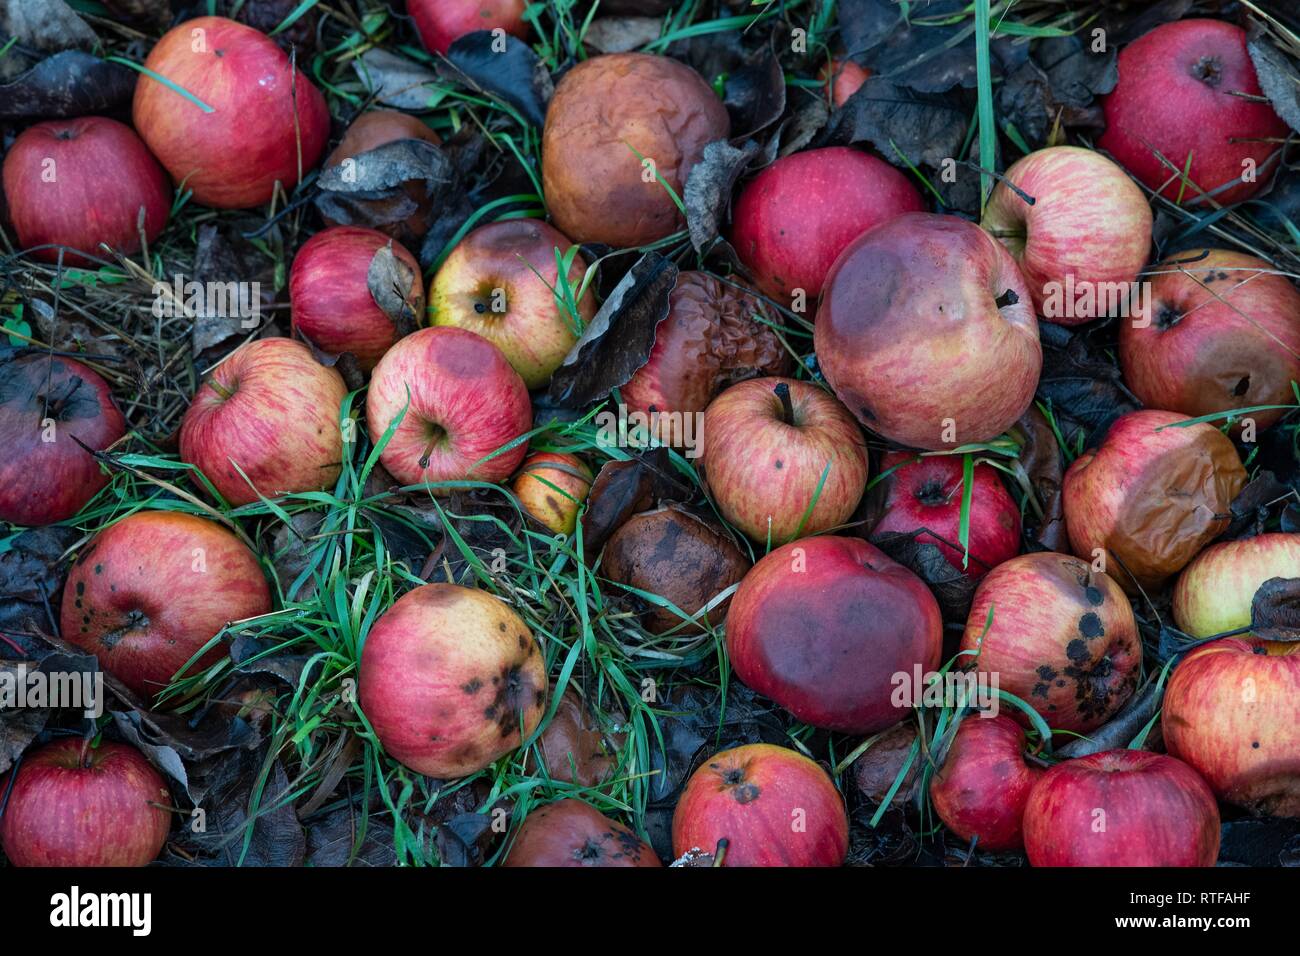 Falling fruit in the grass, Baden-Württemberg, Germany Stock Photo